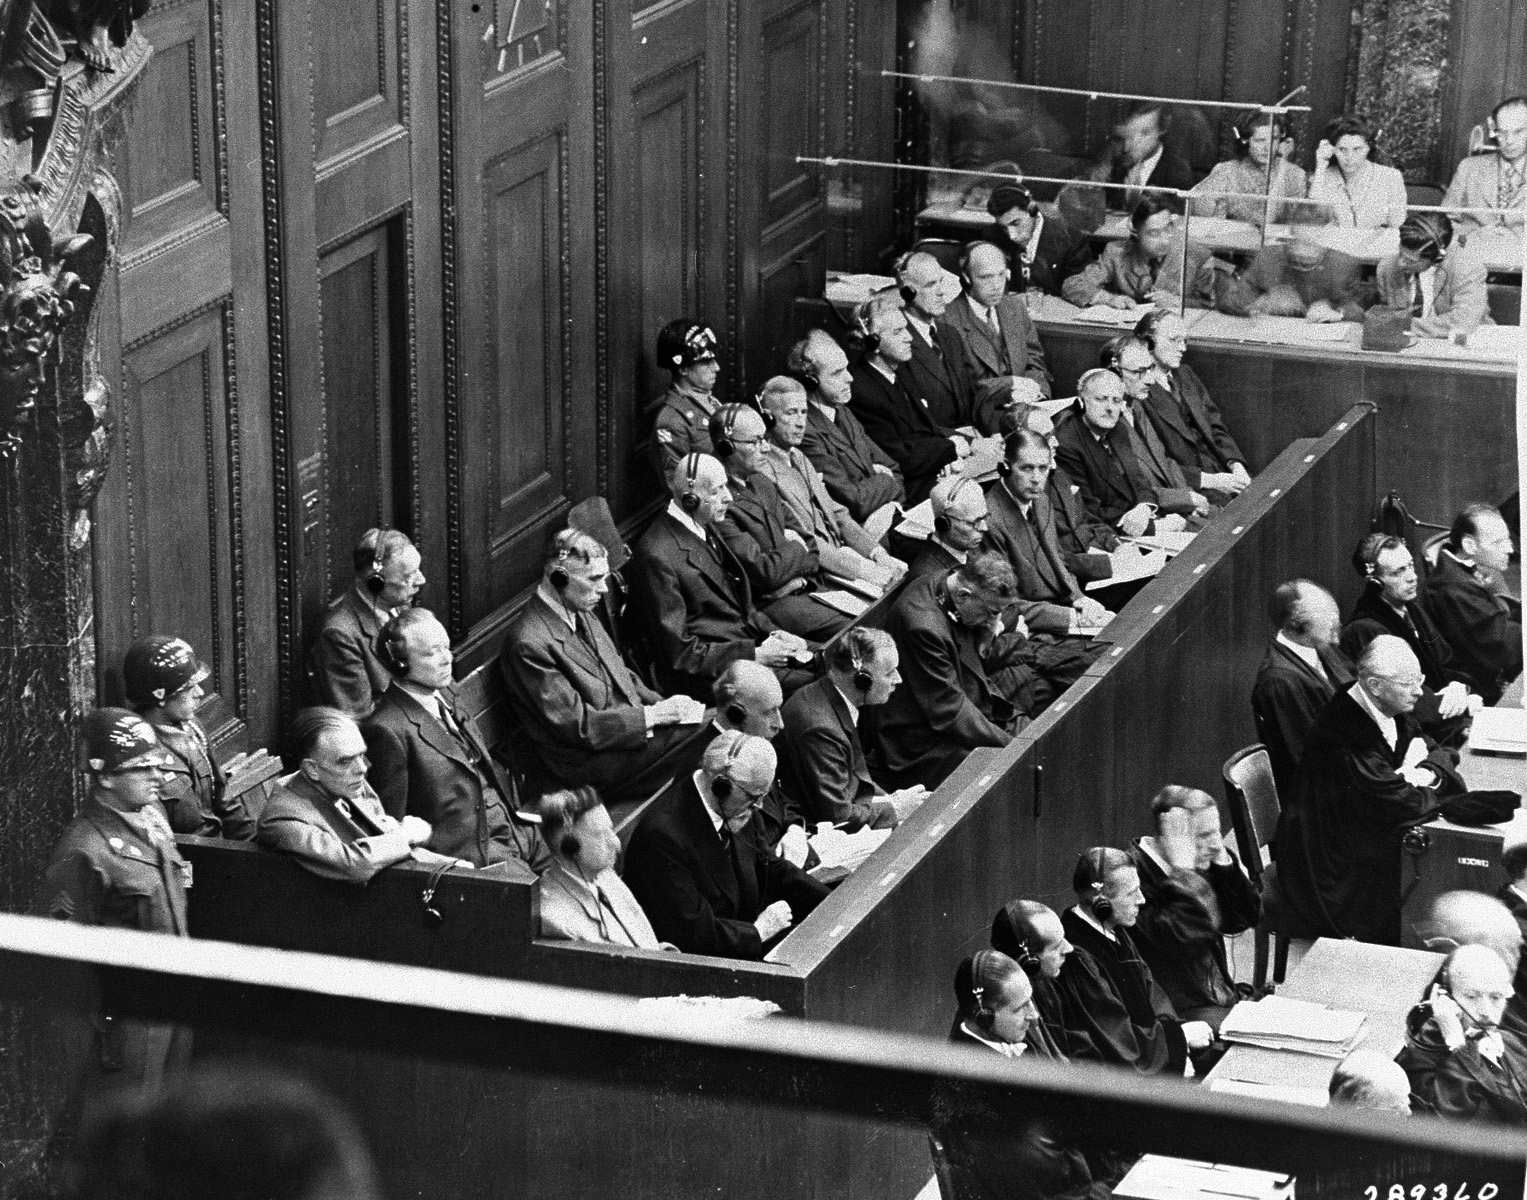 Executives of the I.G. Farben chemical company stand trial for producing Zyklon B, the poison gas used in the Nazi death camps, as well as committing other crimes.